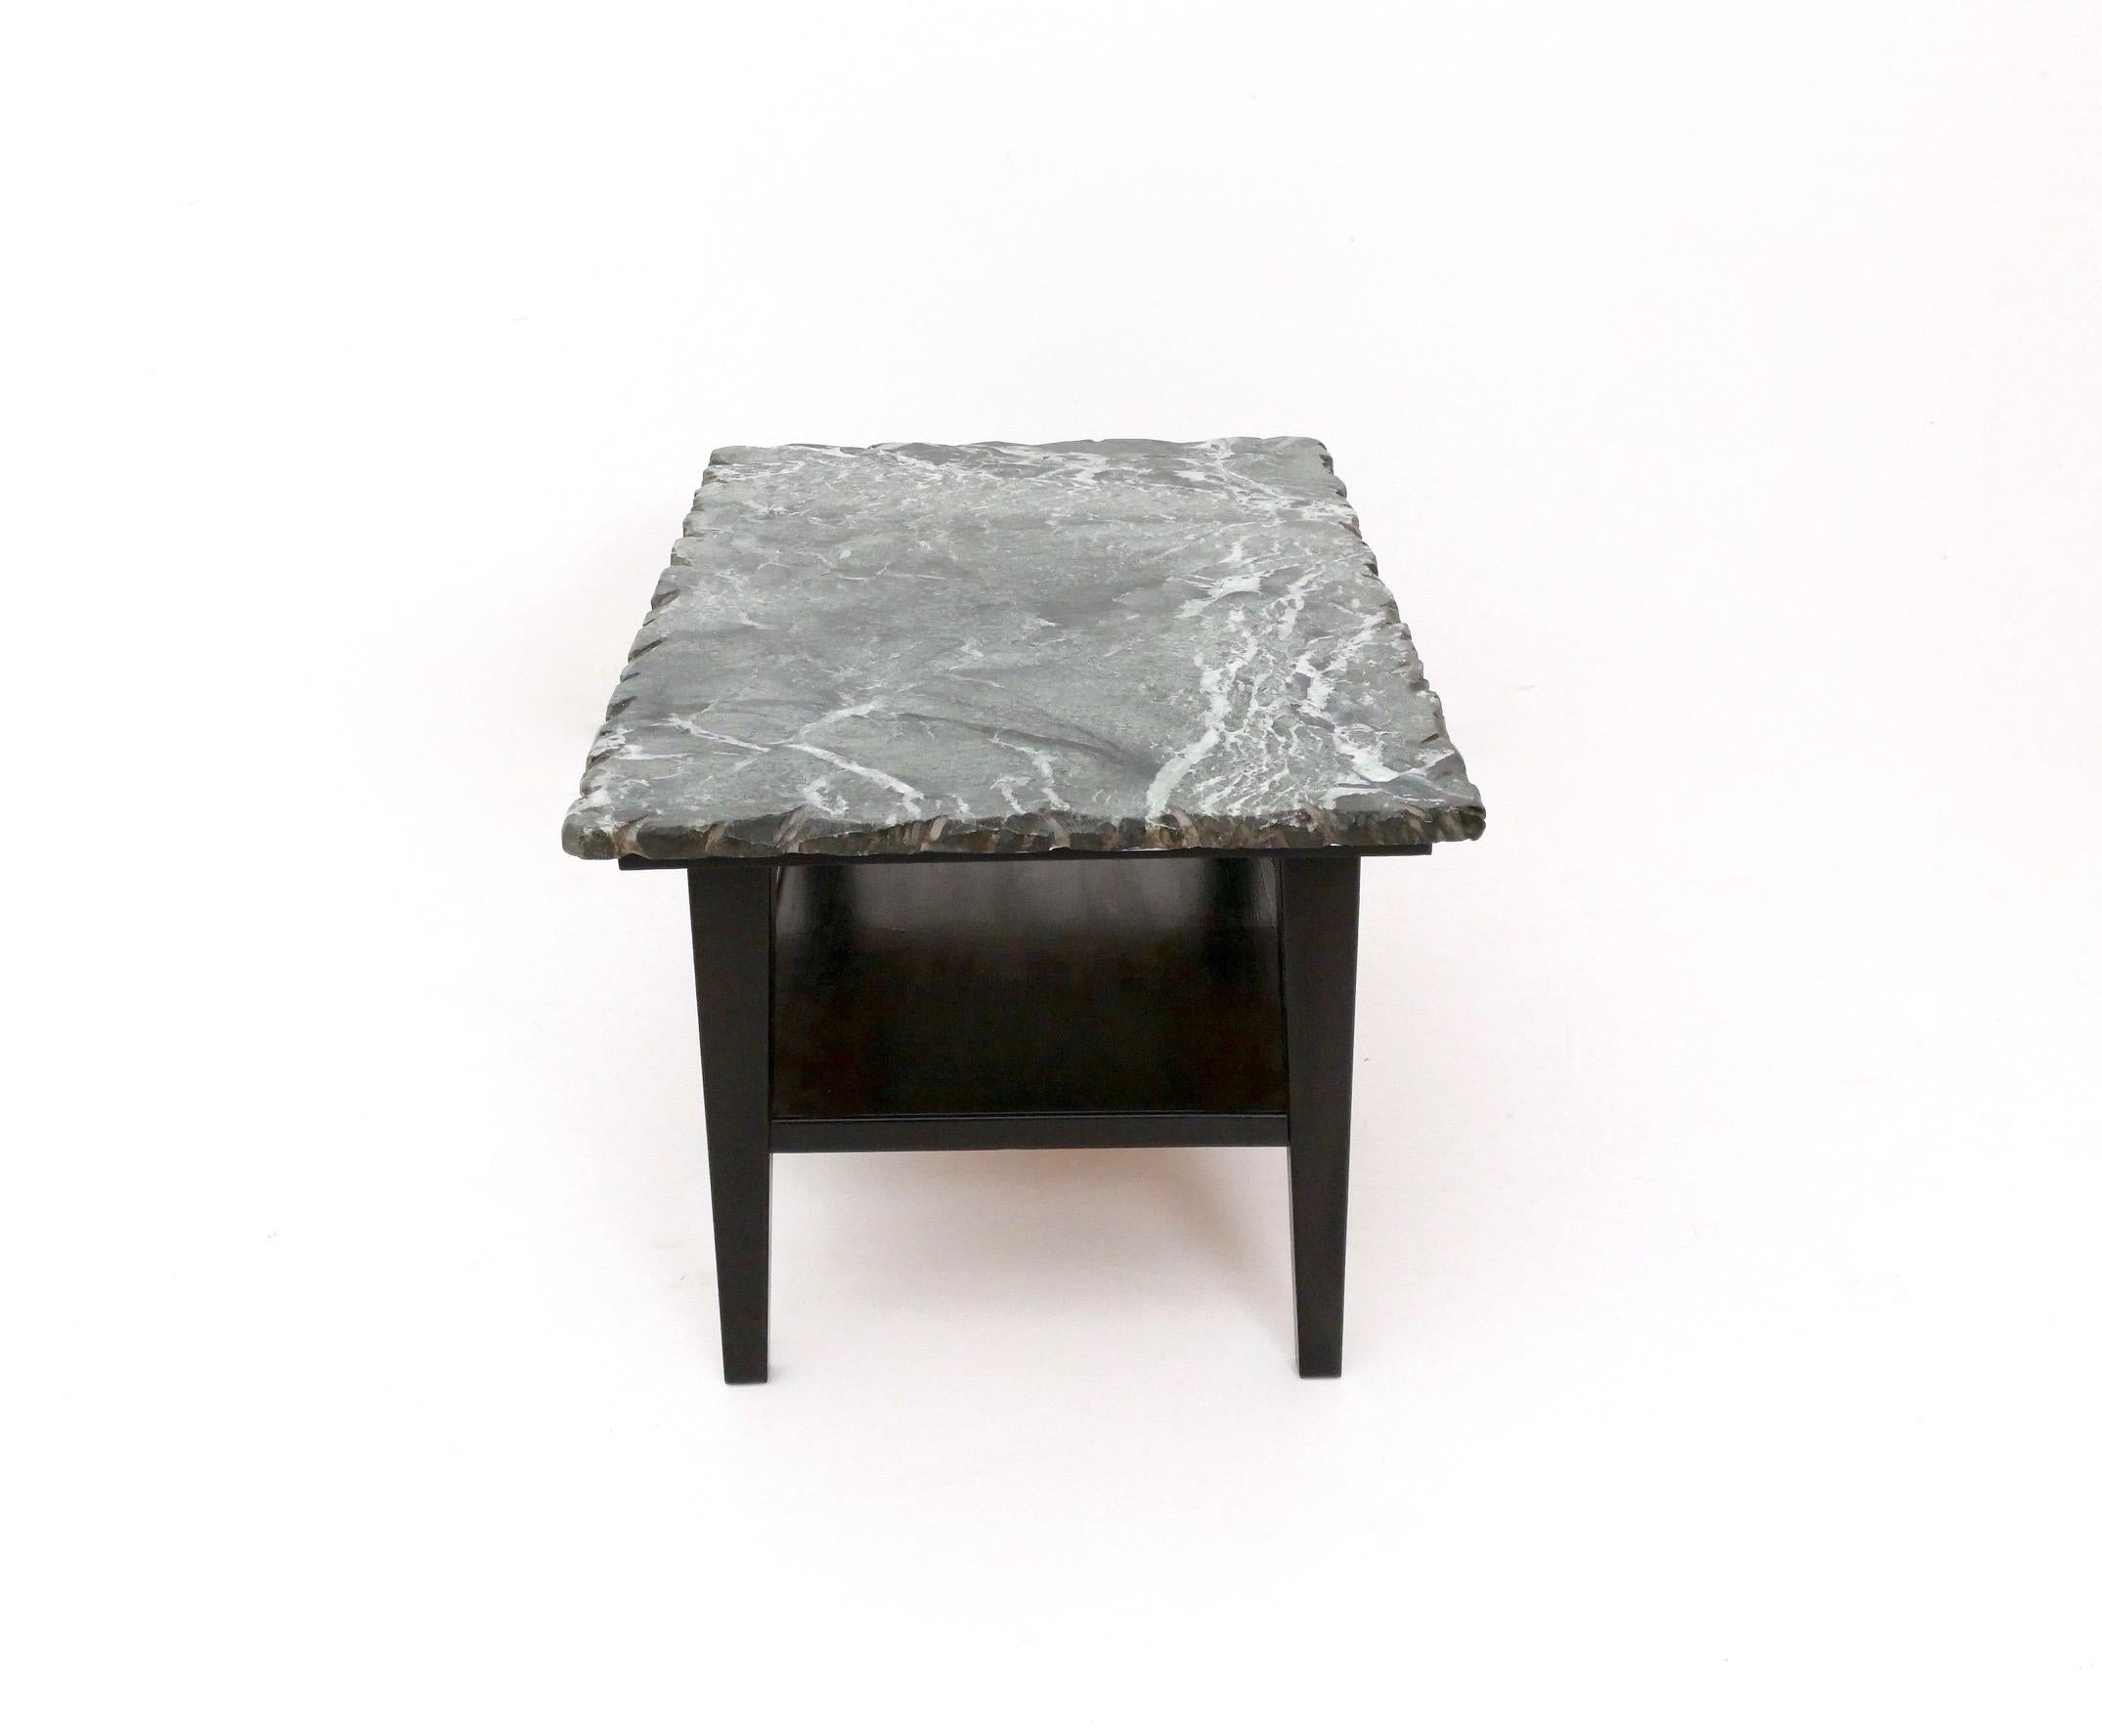 Vintage Ebonized Wood Coffee Table with a Green Alps Marble Top, Italy In Excellent Condition For Sale In Bresso, Lombardy